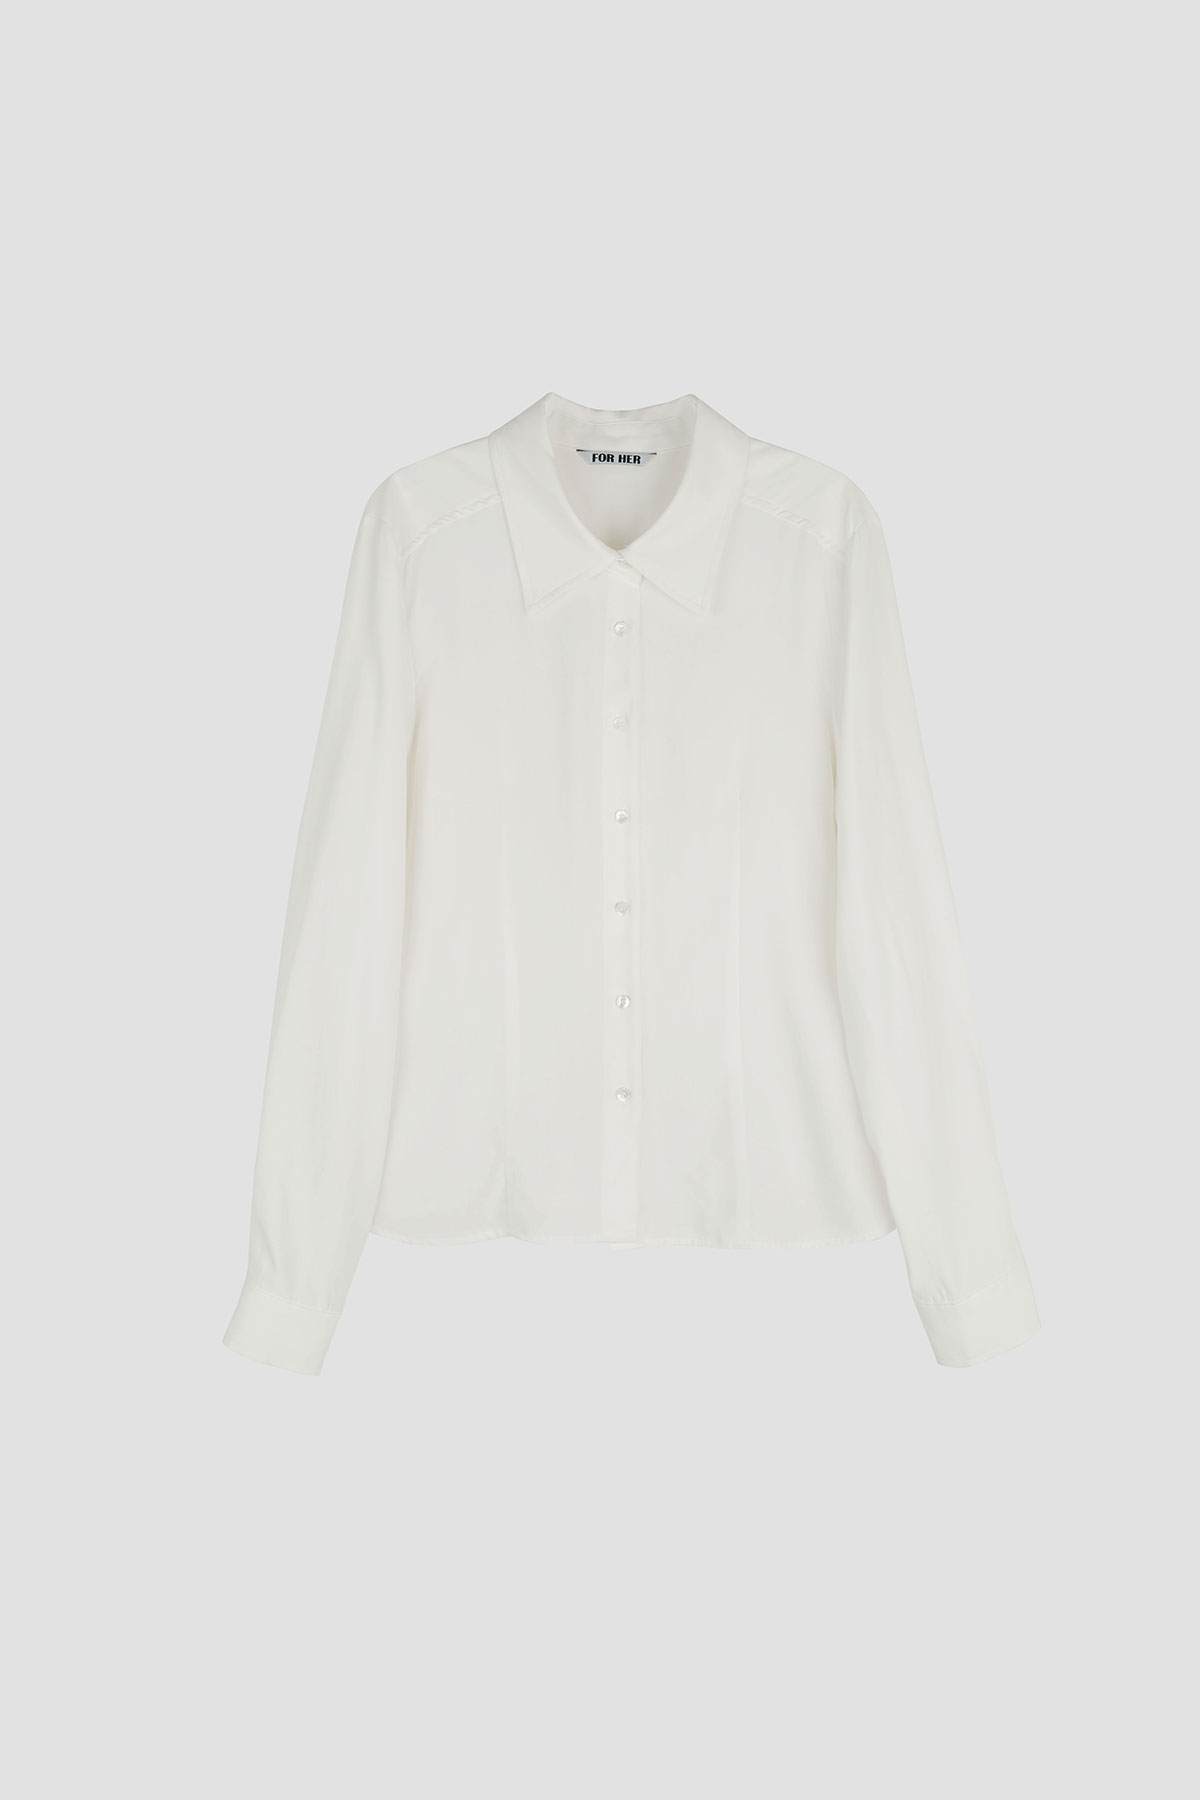 FOR HER MODAL LINE BLOUSE (IVORY) 2차